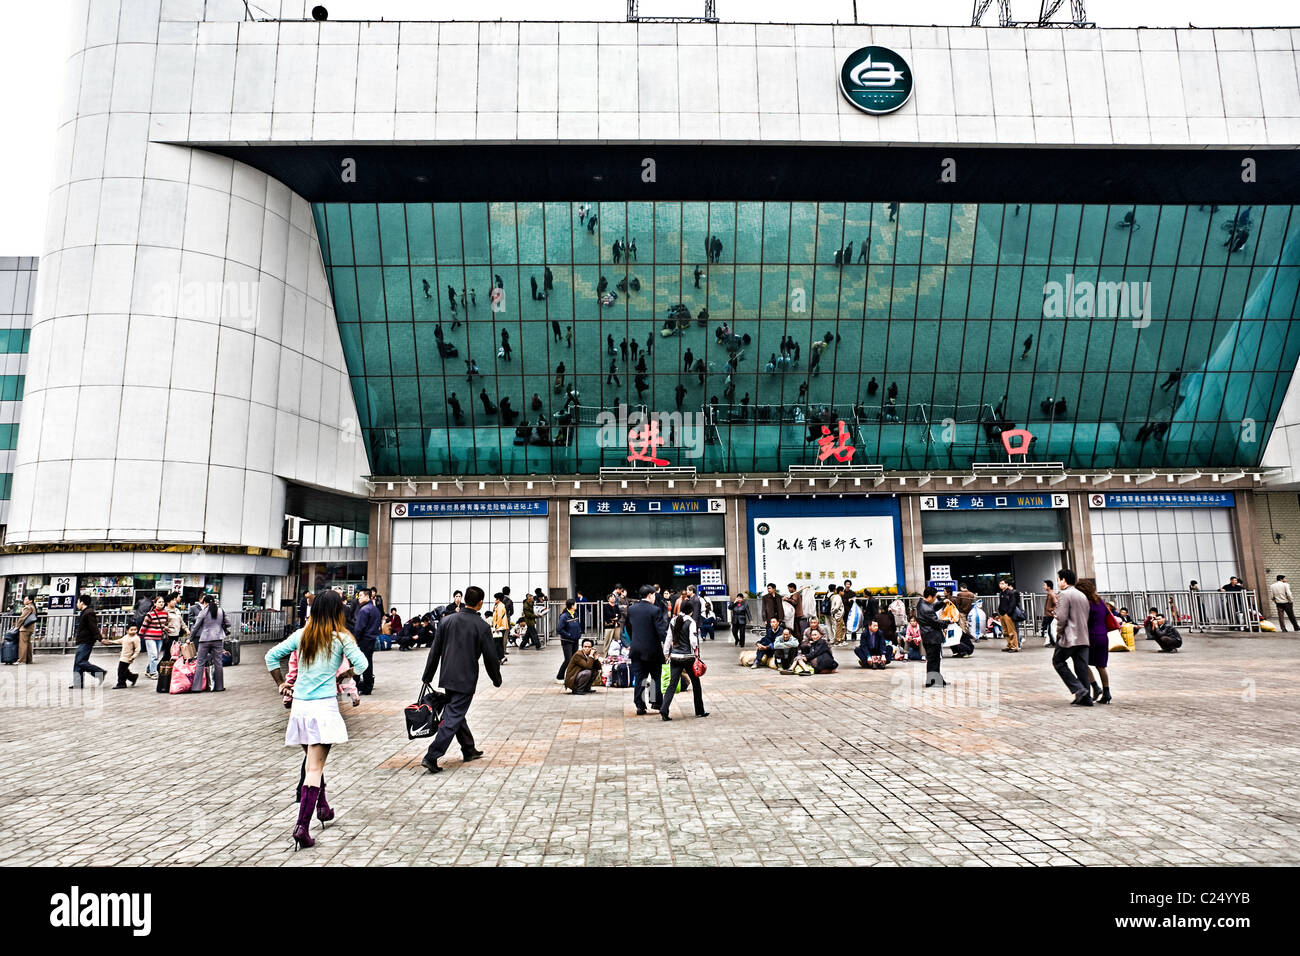 CHINA, WUHAN: Hankou Railway Station in Wuhan with plaza and people reflected in the mirrors on the front of the station. Stock Photo